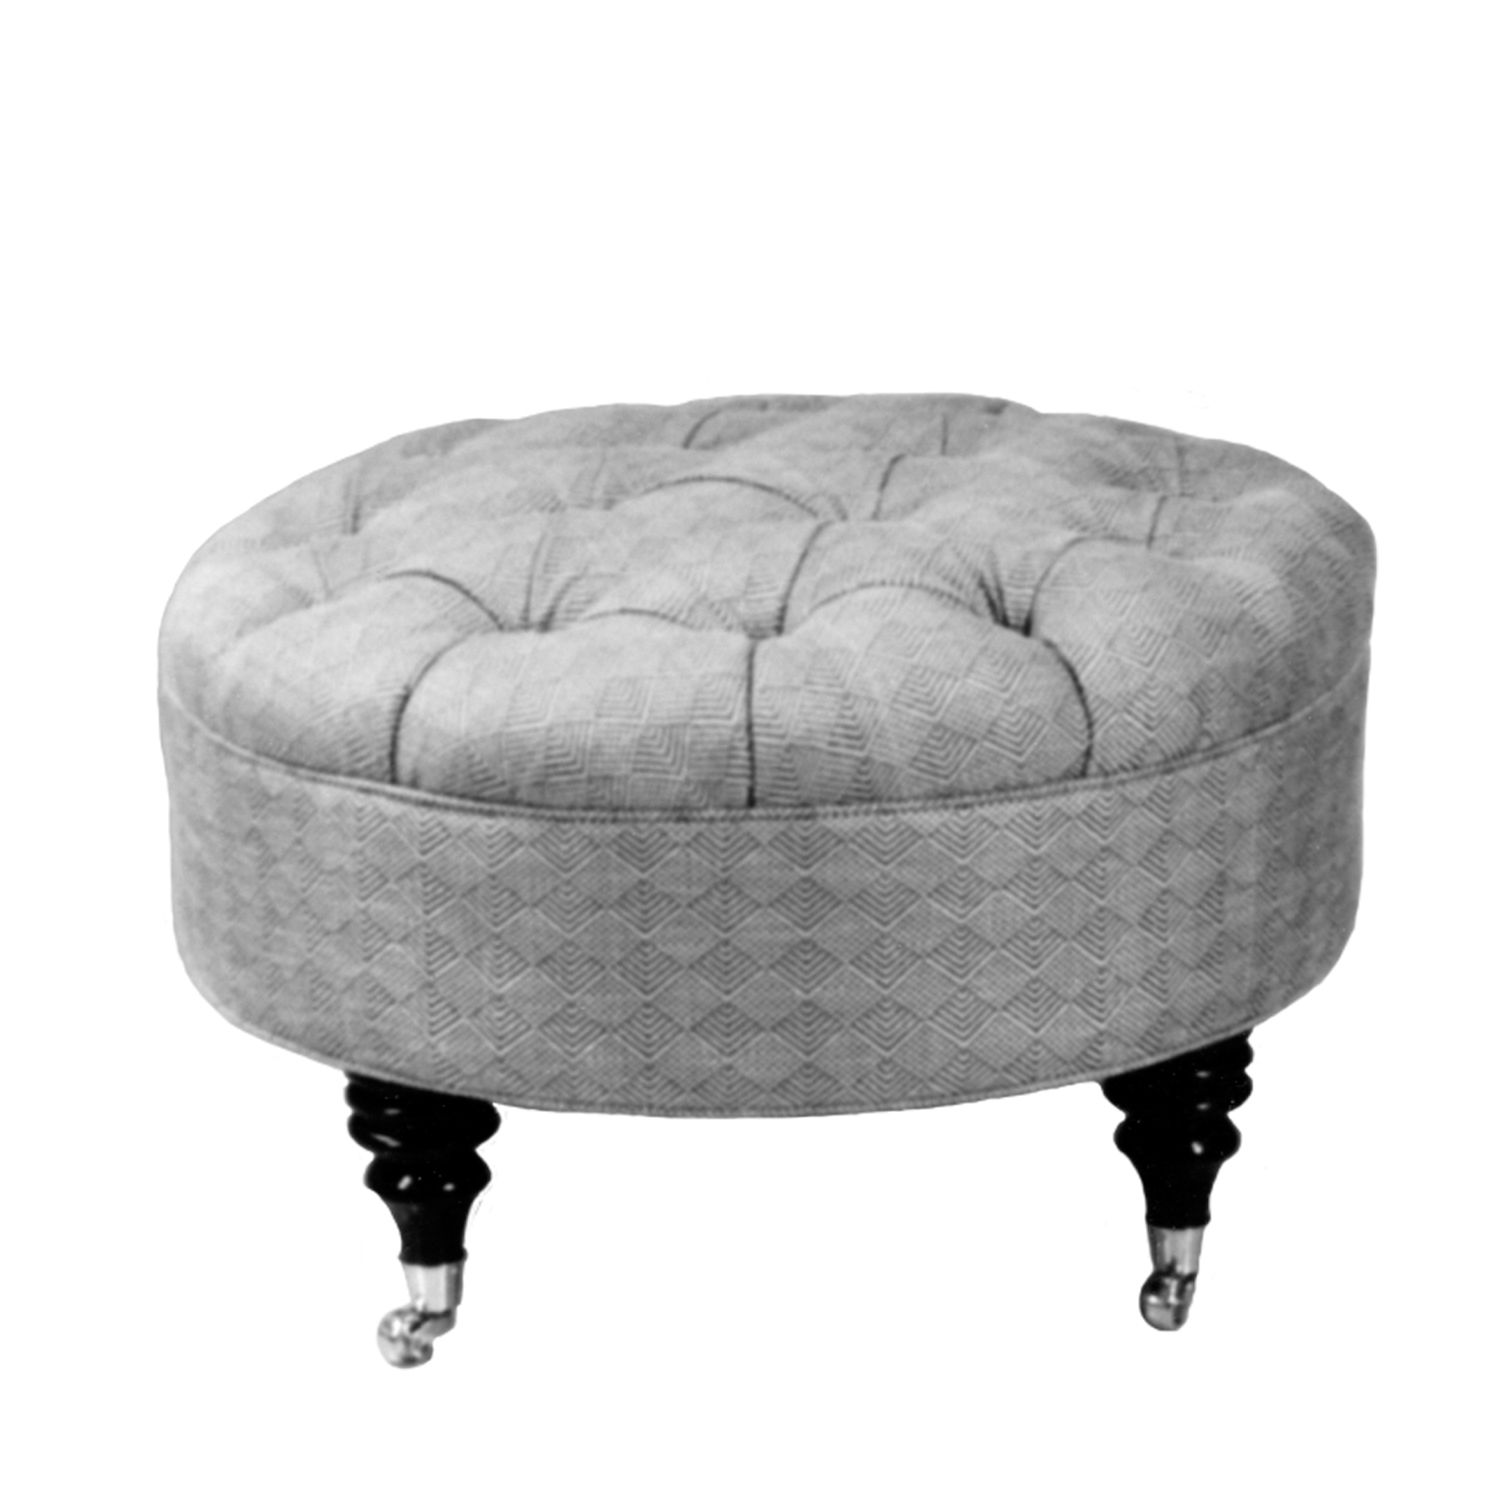 Helmsley Tufted Ottoman | Stewart Furniture Within Caramel Leather And Bronze Steel Tufted Square Ottomans (View 7 of 20)